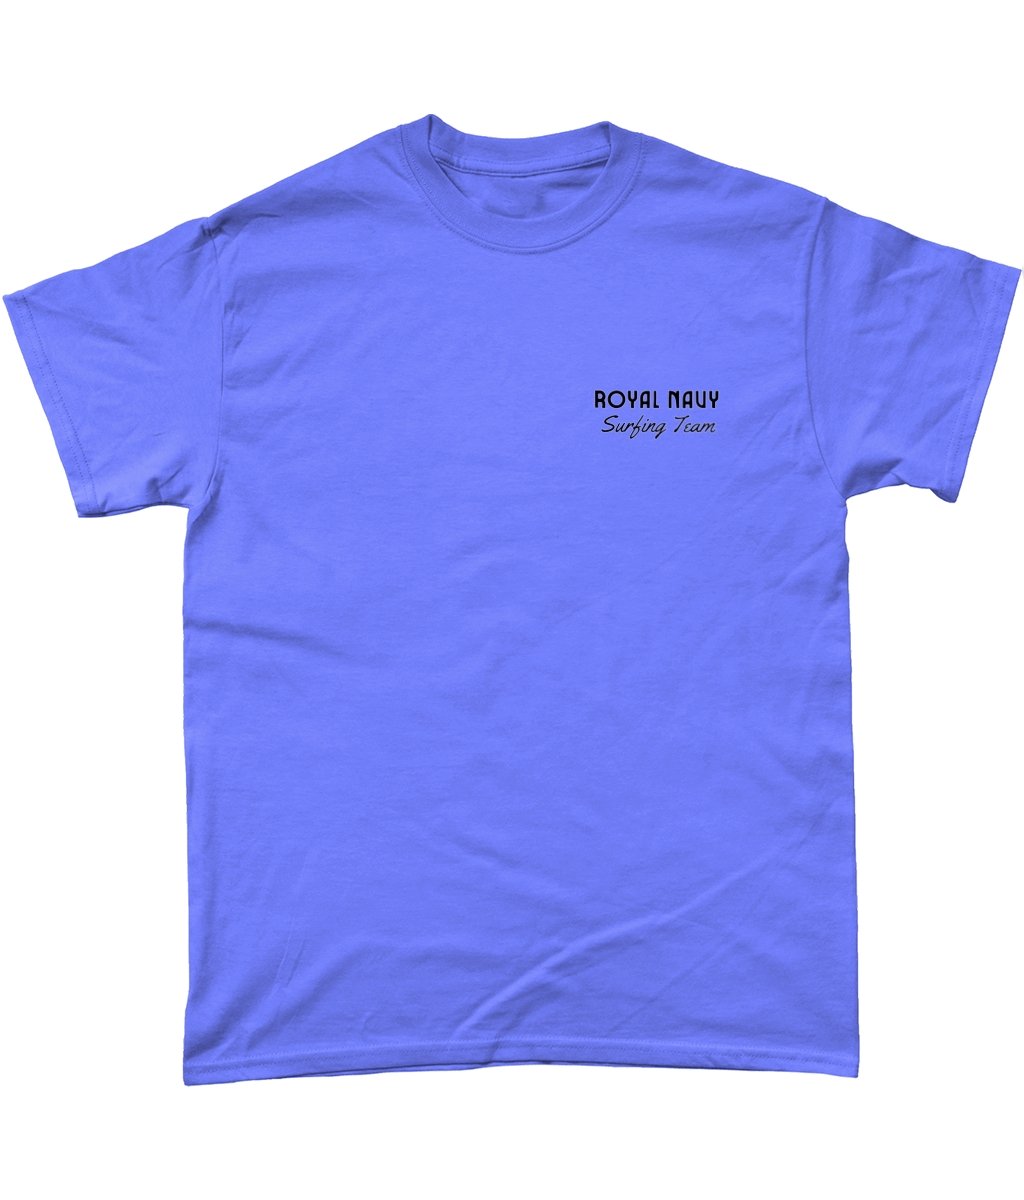 Official 2021 Royal Navy Surfing Team Tee - The Chits Inn